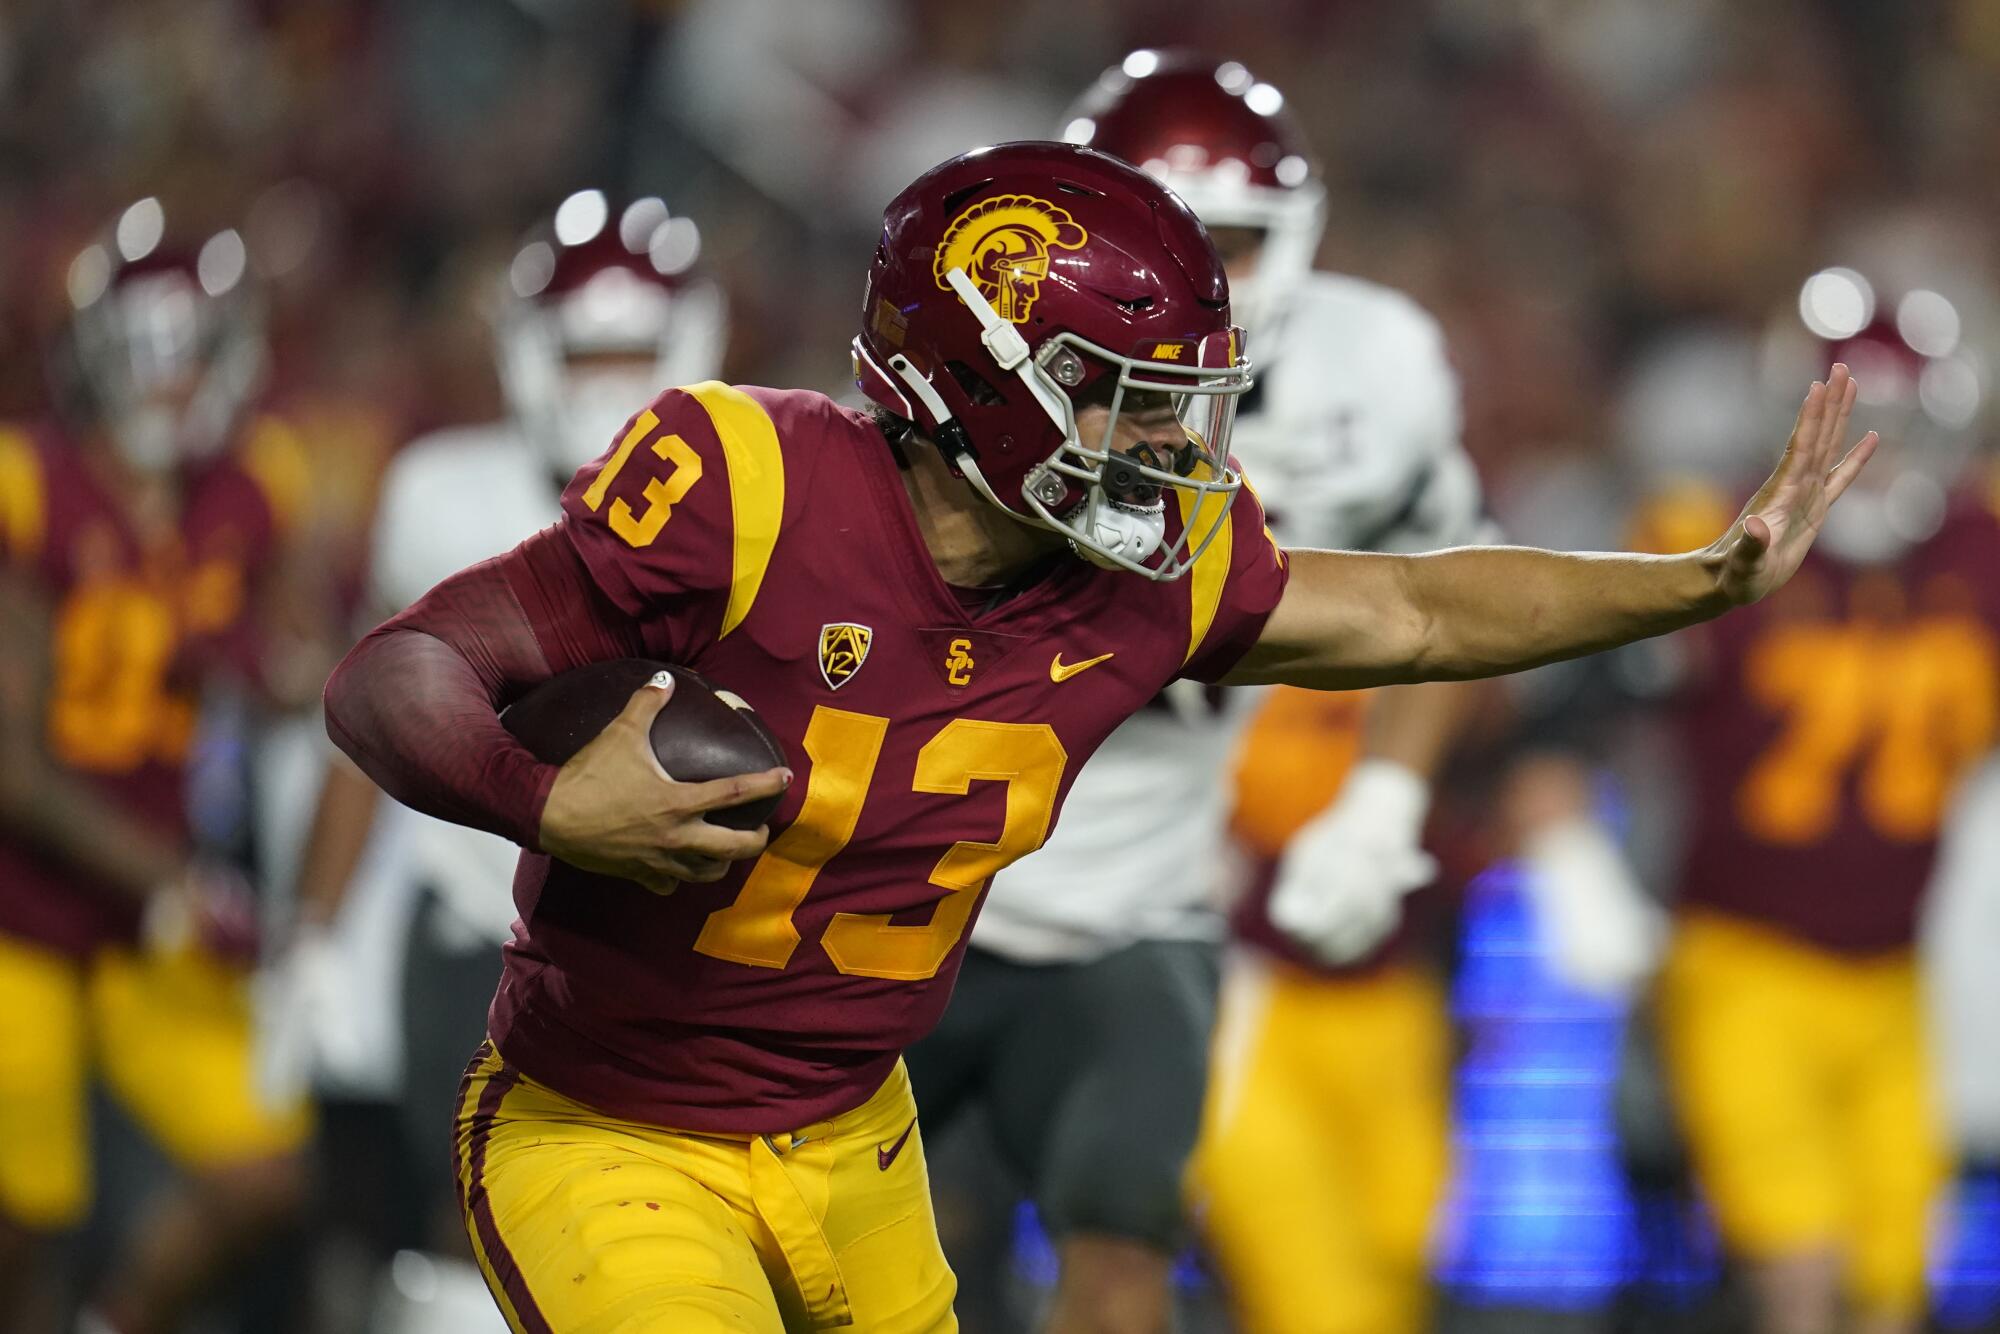 USC quarterback Caleb Williams thrusts his arm out to avoid a tackle while carrying the football